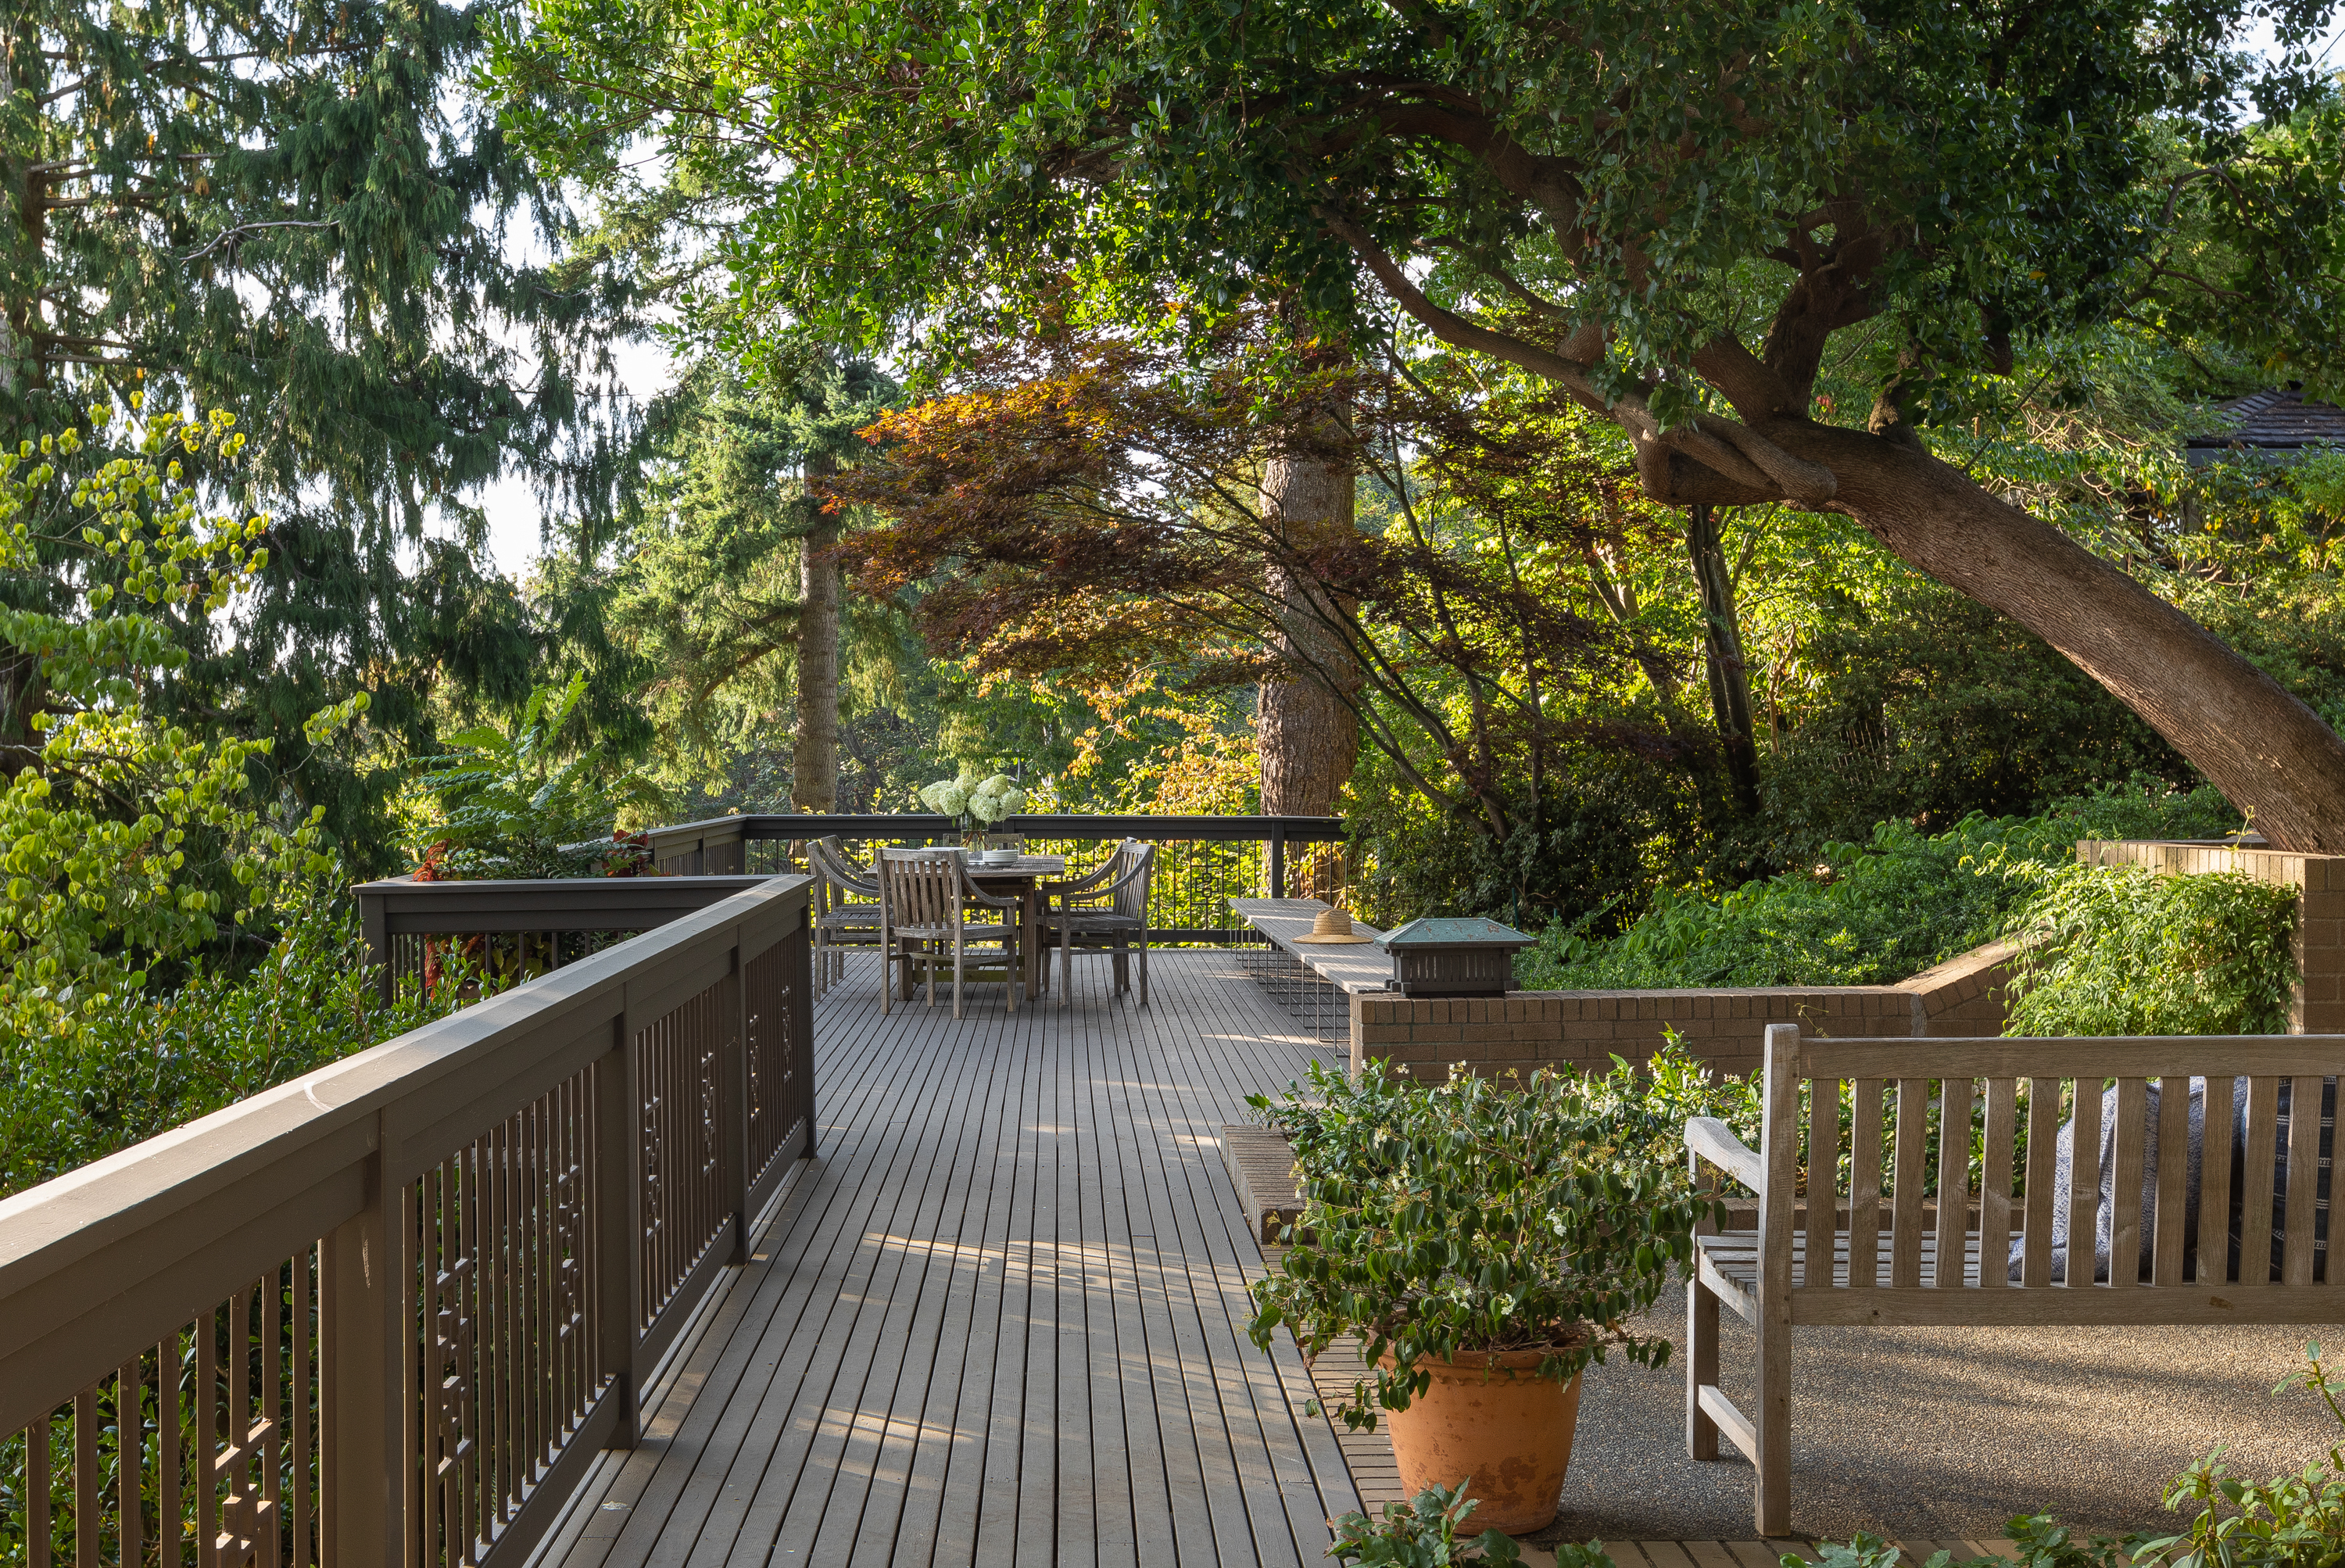 The large raised deck offers impressive views and features nods to Asian design and architecture.